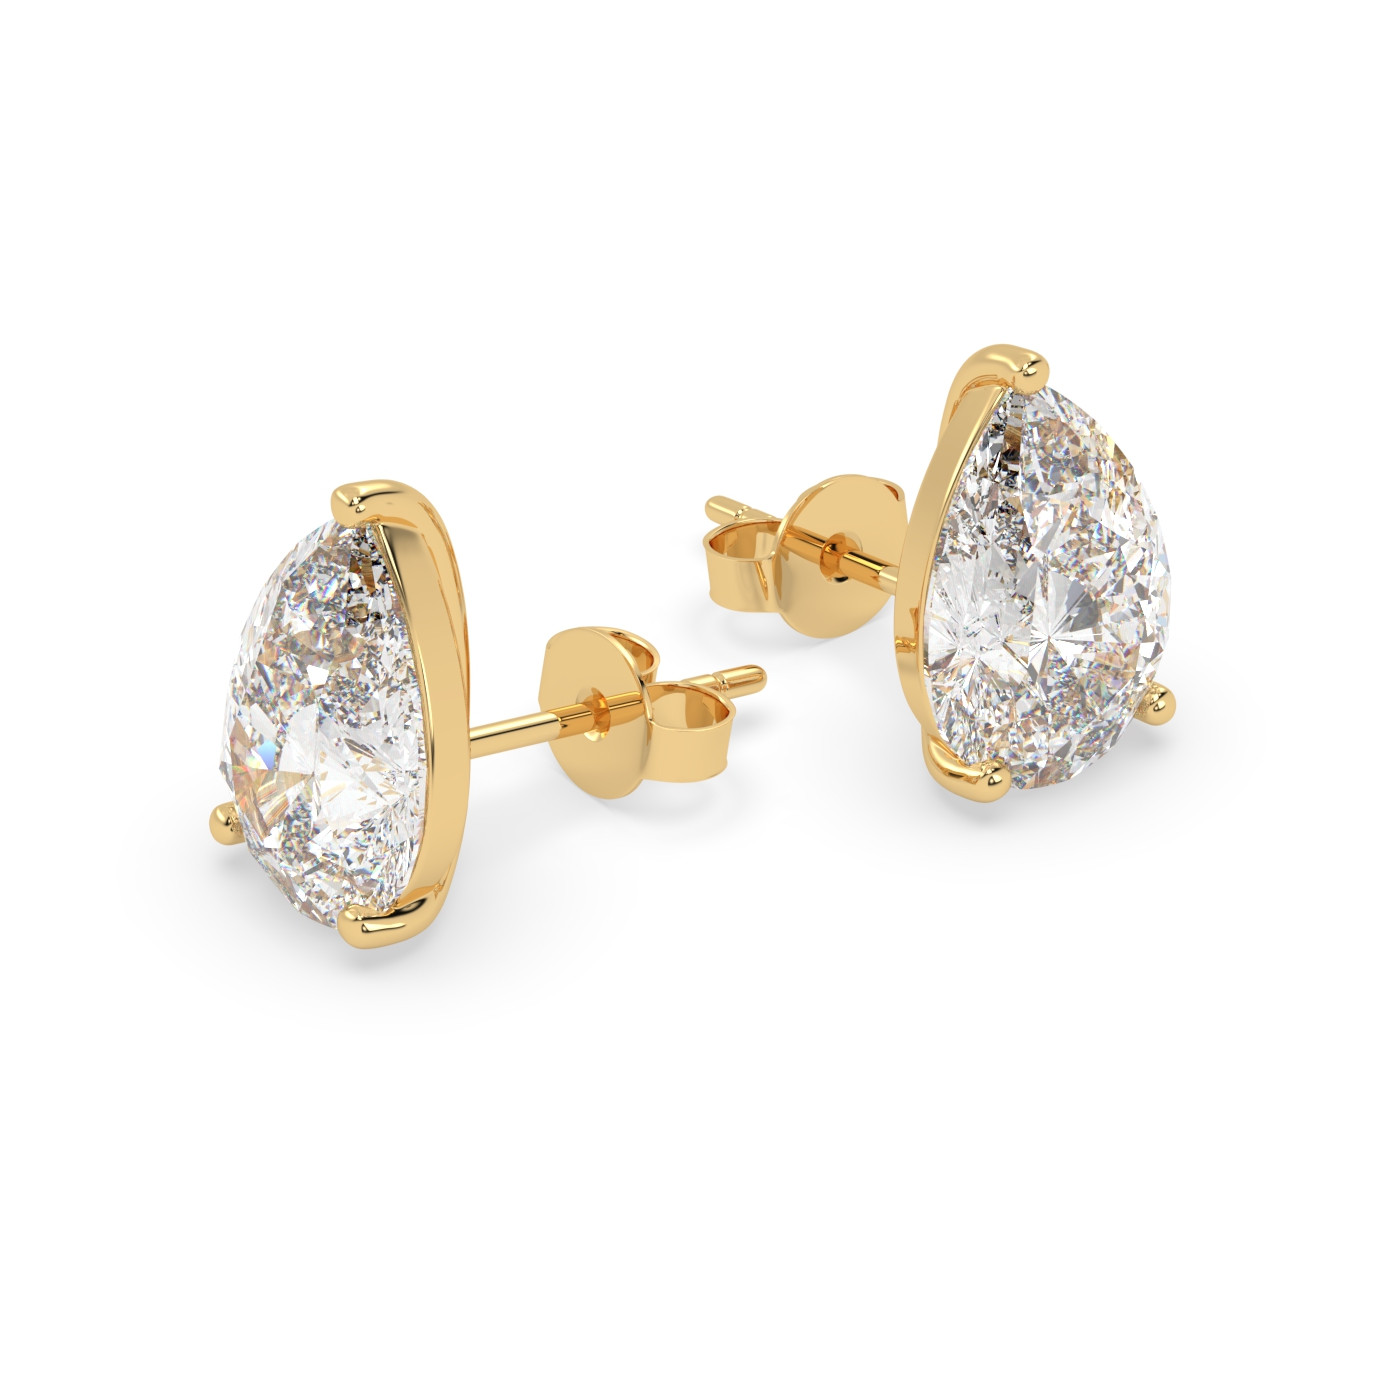 18K YELLOW GOLD Pear Stud Earrings with butterfly back